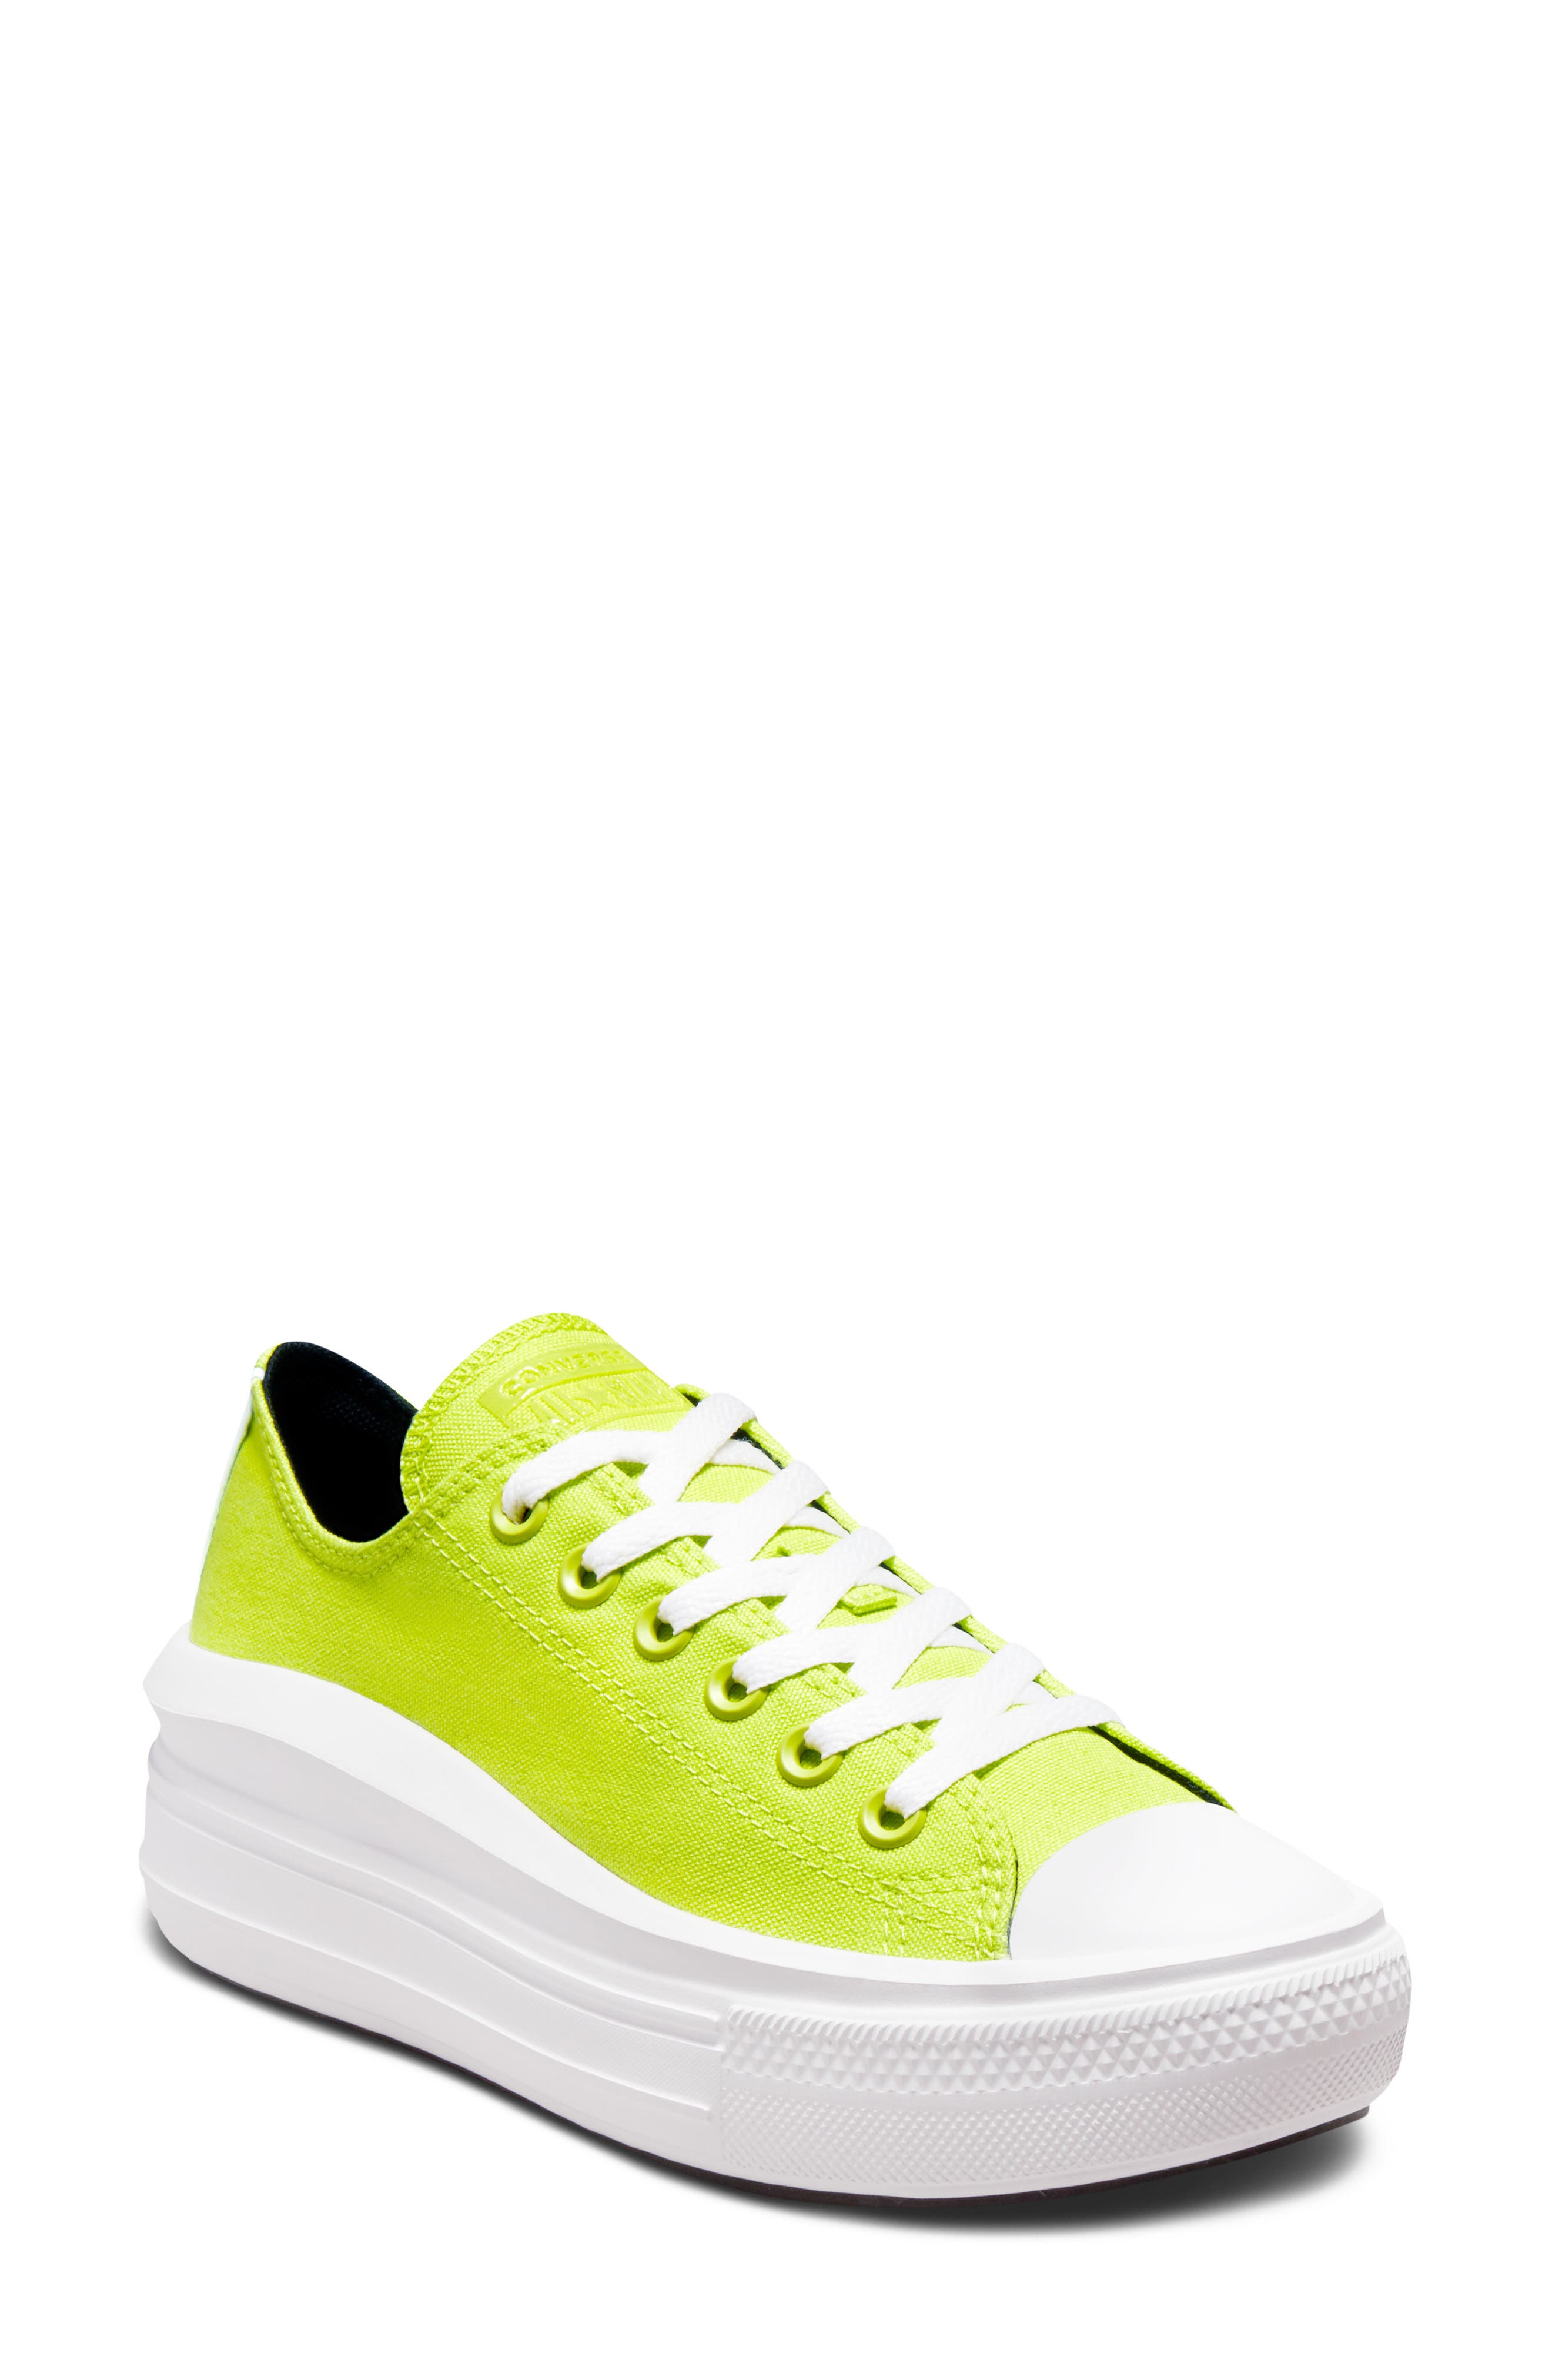 converse all star 2 low